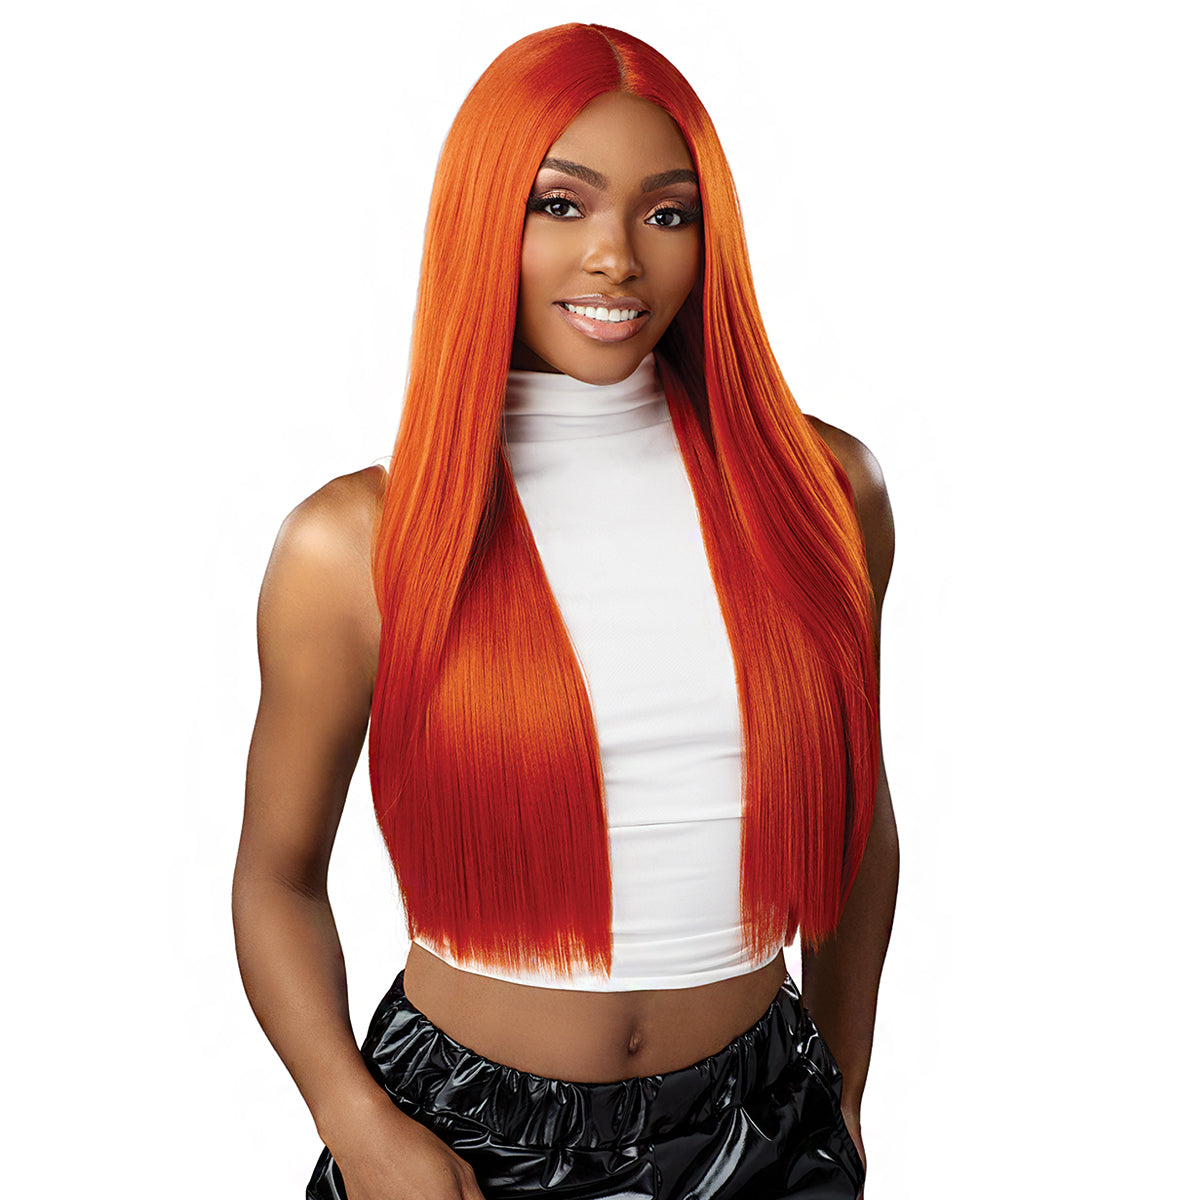 Sensationnel Shear Muse Spice Krush Synthetic Hair Empress HD Lace Front Wig - KAMARIA